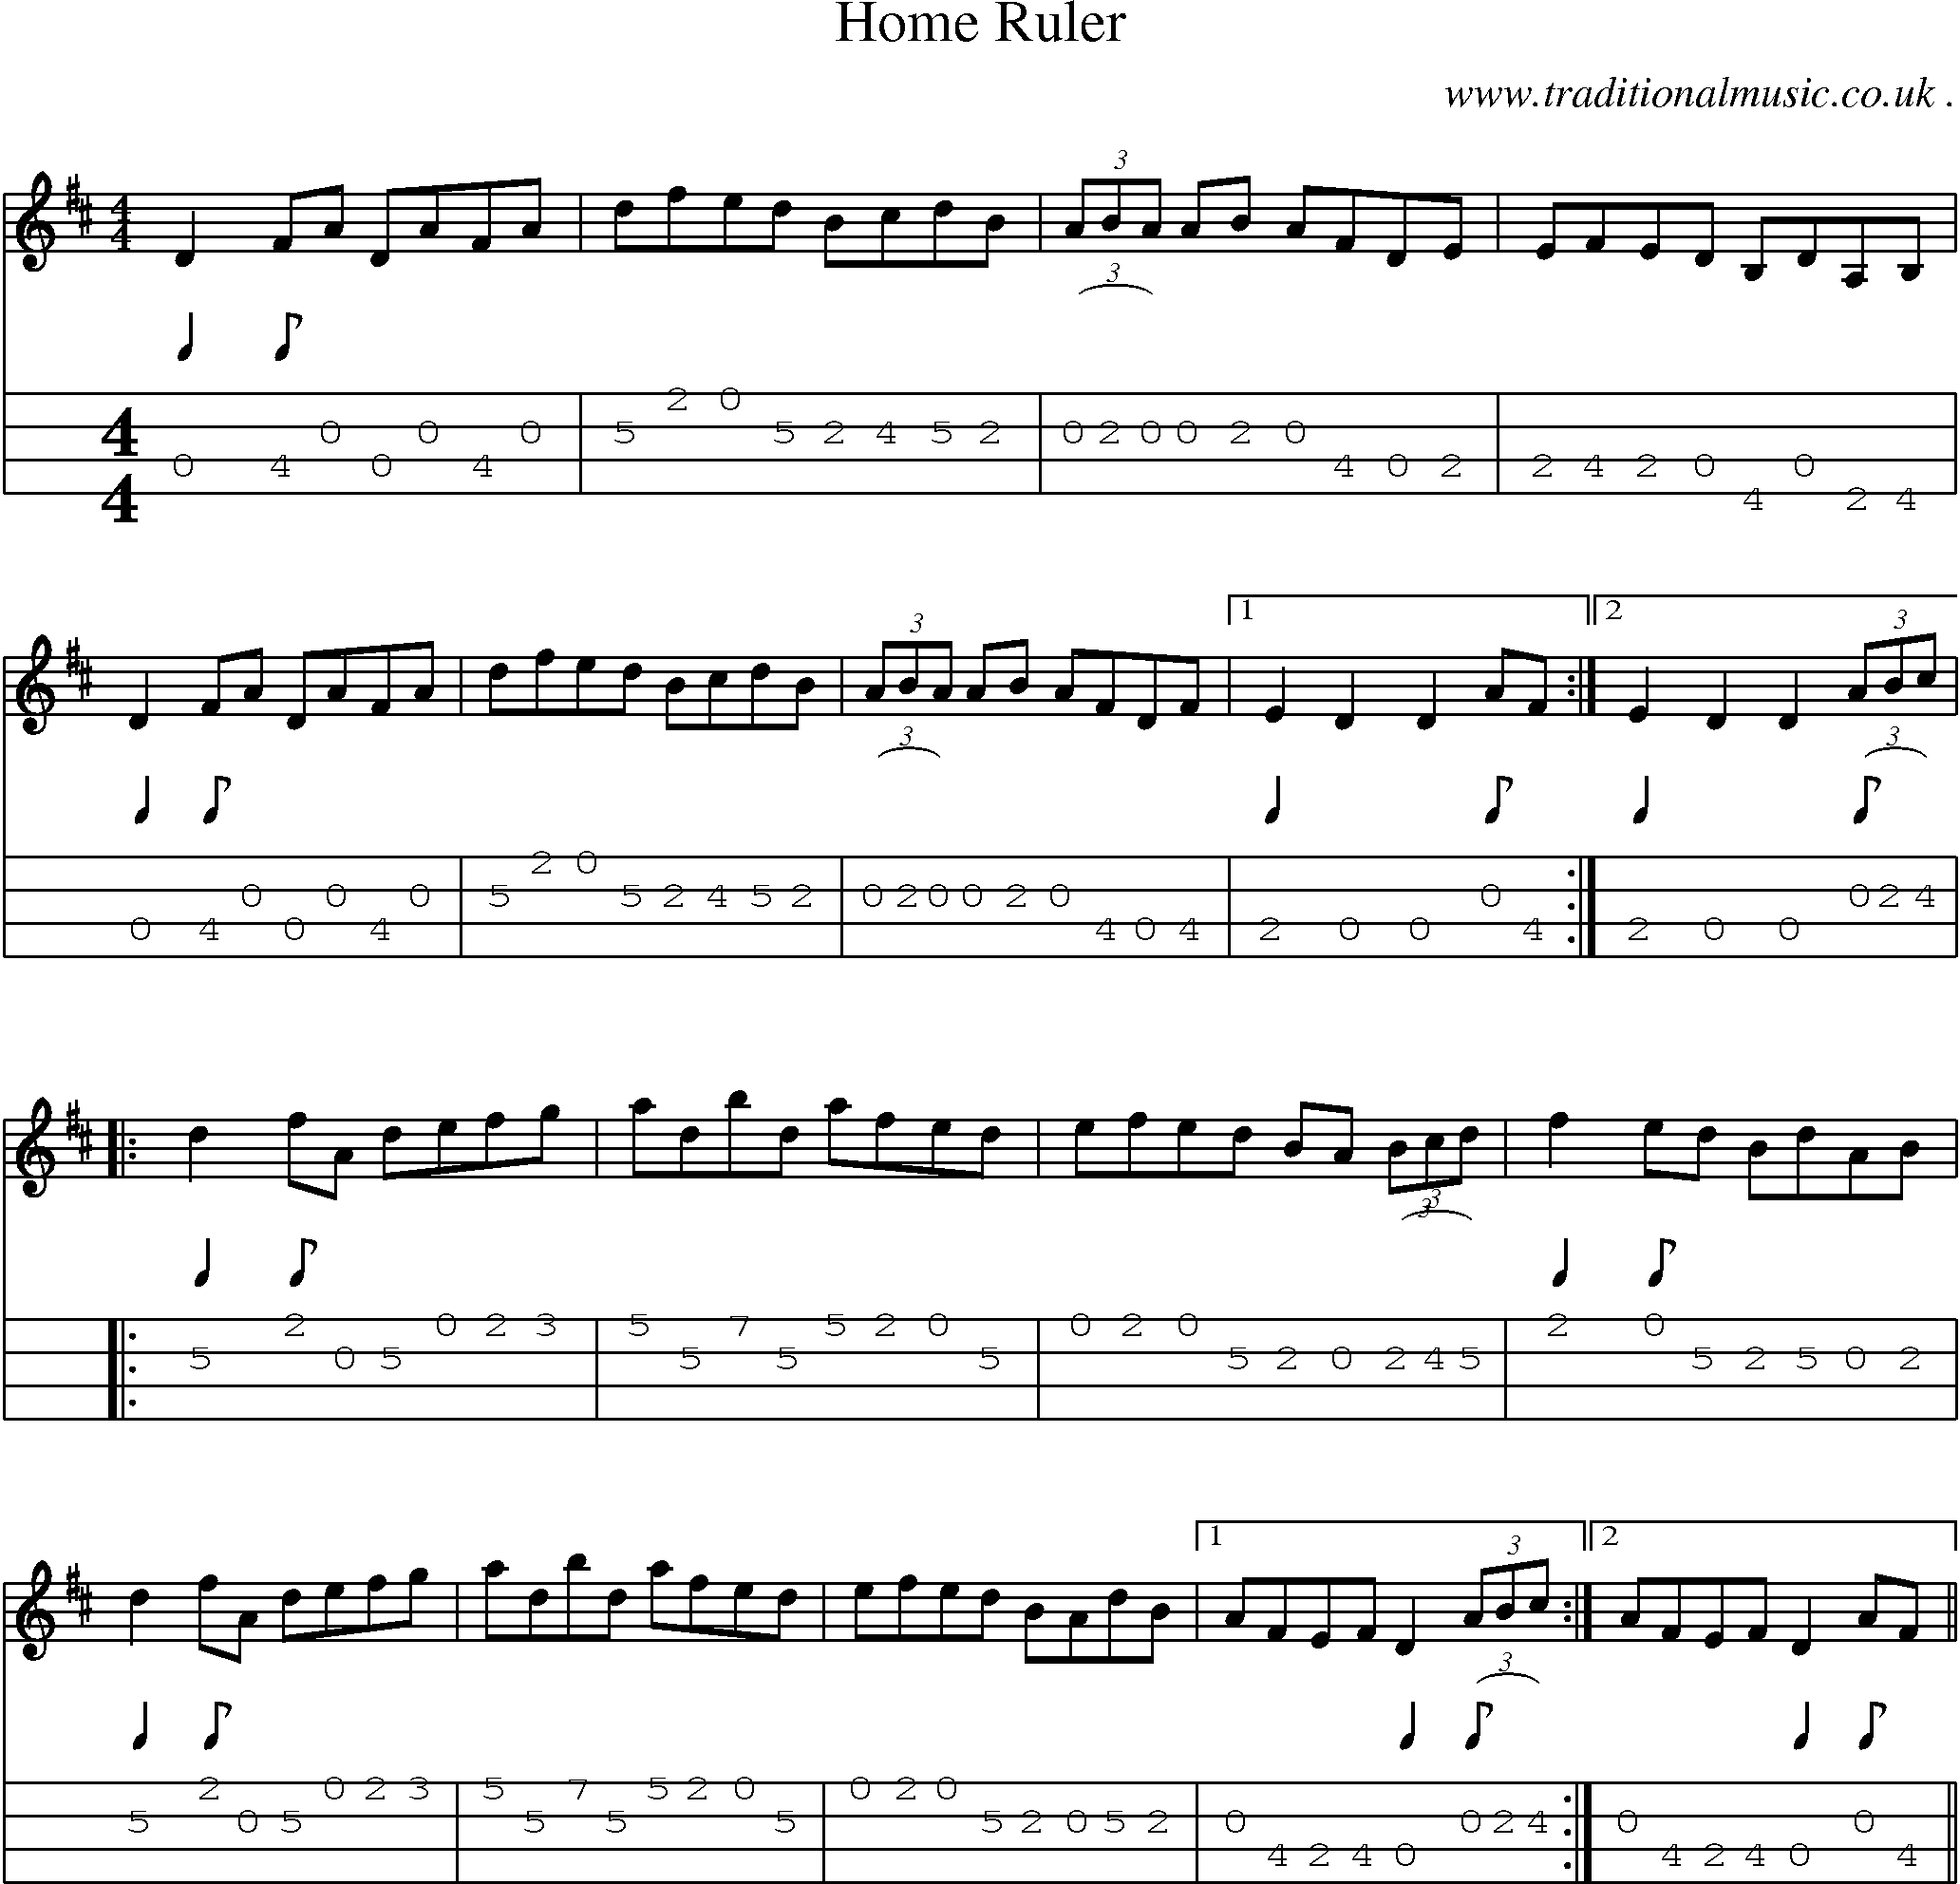 Sheet-Music and Mandolin Tabs for Home Ruler